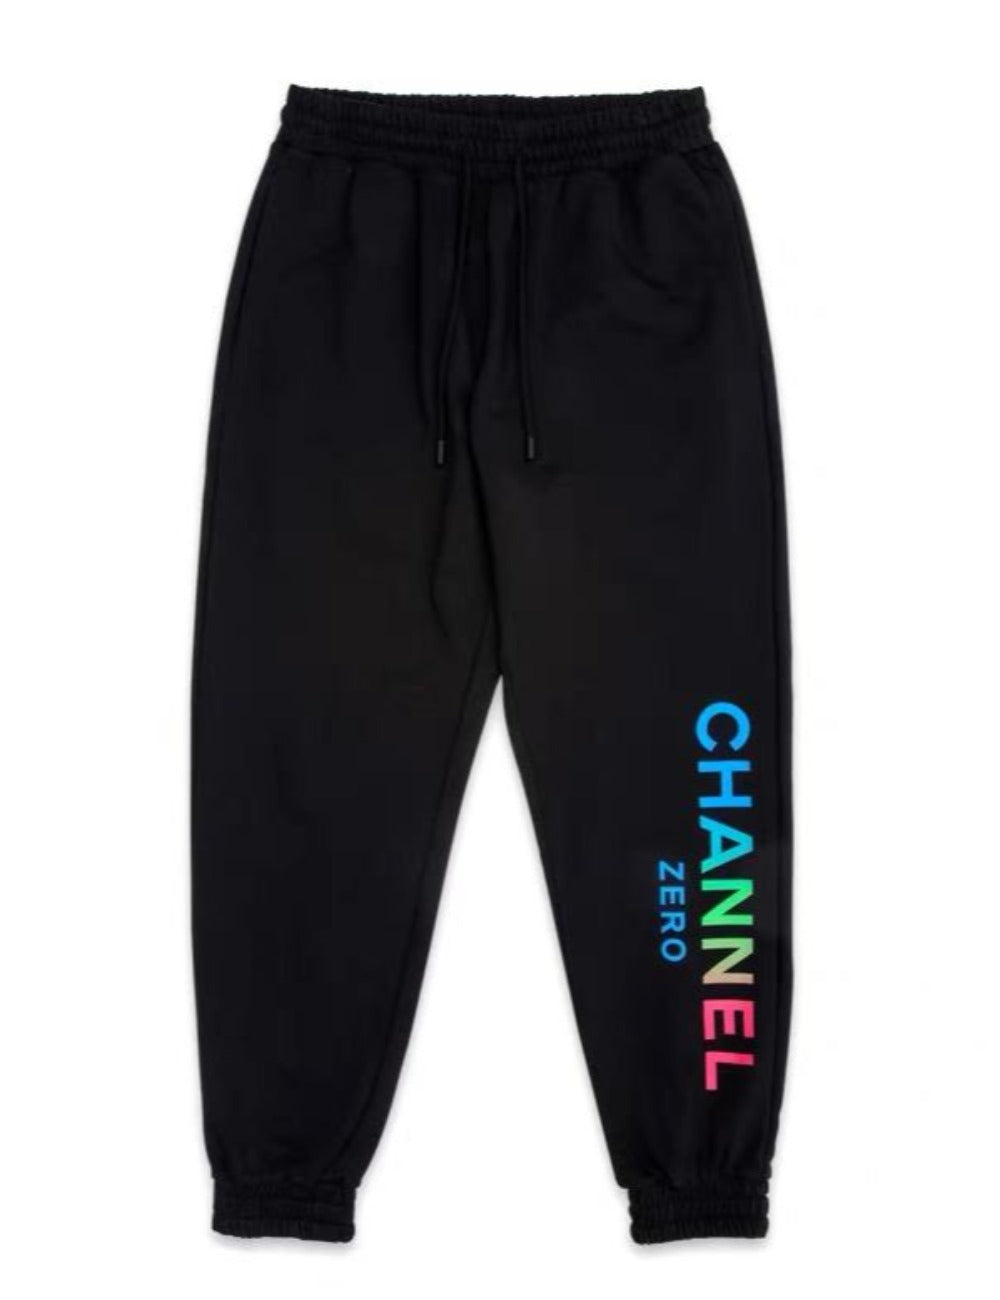 SSUR Plus Channel Zero Rainbow Long Pant ( Colorful ) - Shop Streetwear, Sneakers, Slippers and Gifts online | Malaysia - The Factory KL